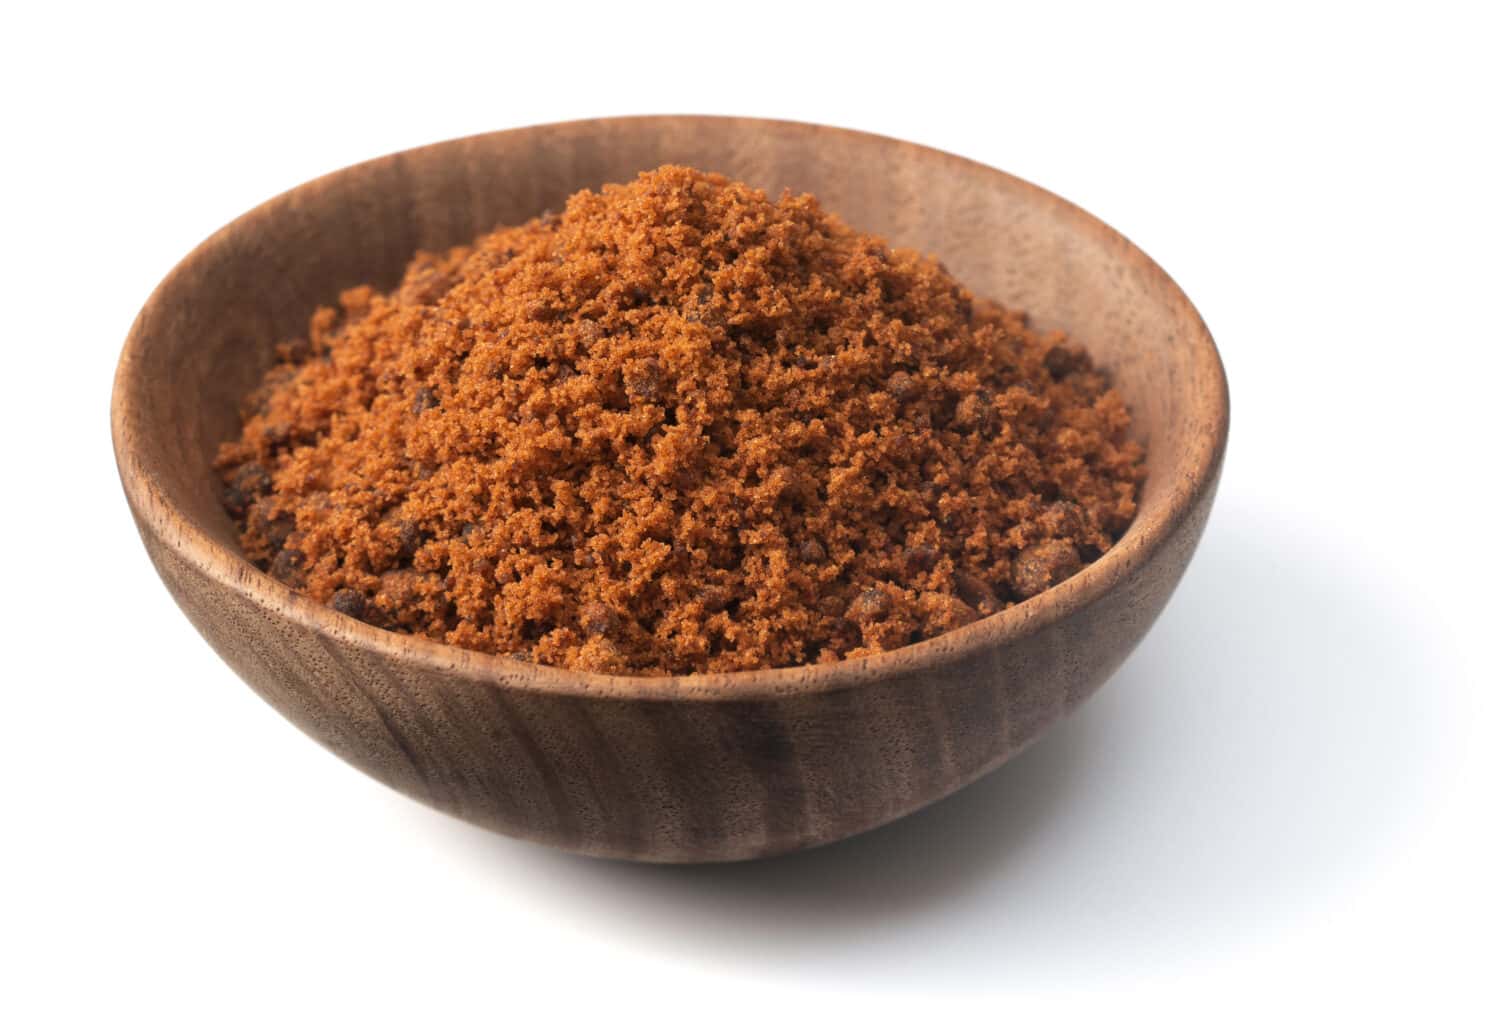 brown granulated sugar in the wooden bowl, isolated on pure white background